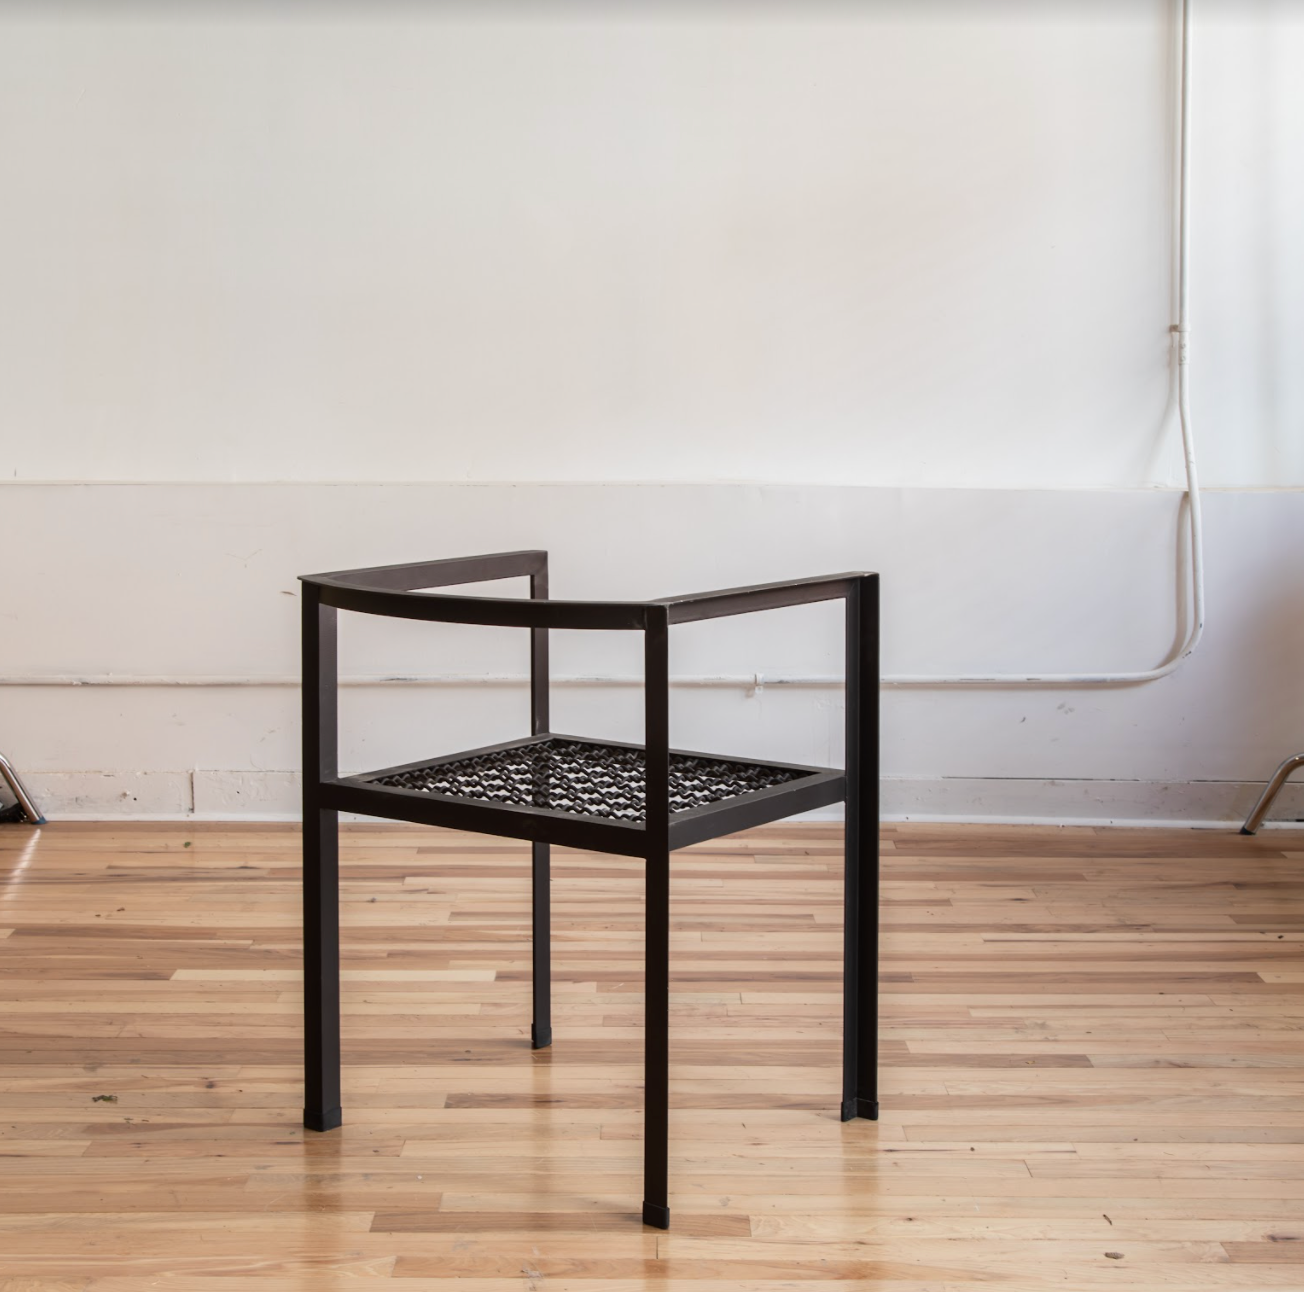 Rent: Chair No 2 by Rei Kawakubo for Comme Des Garcon